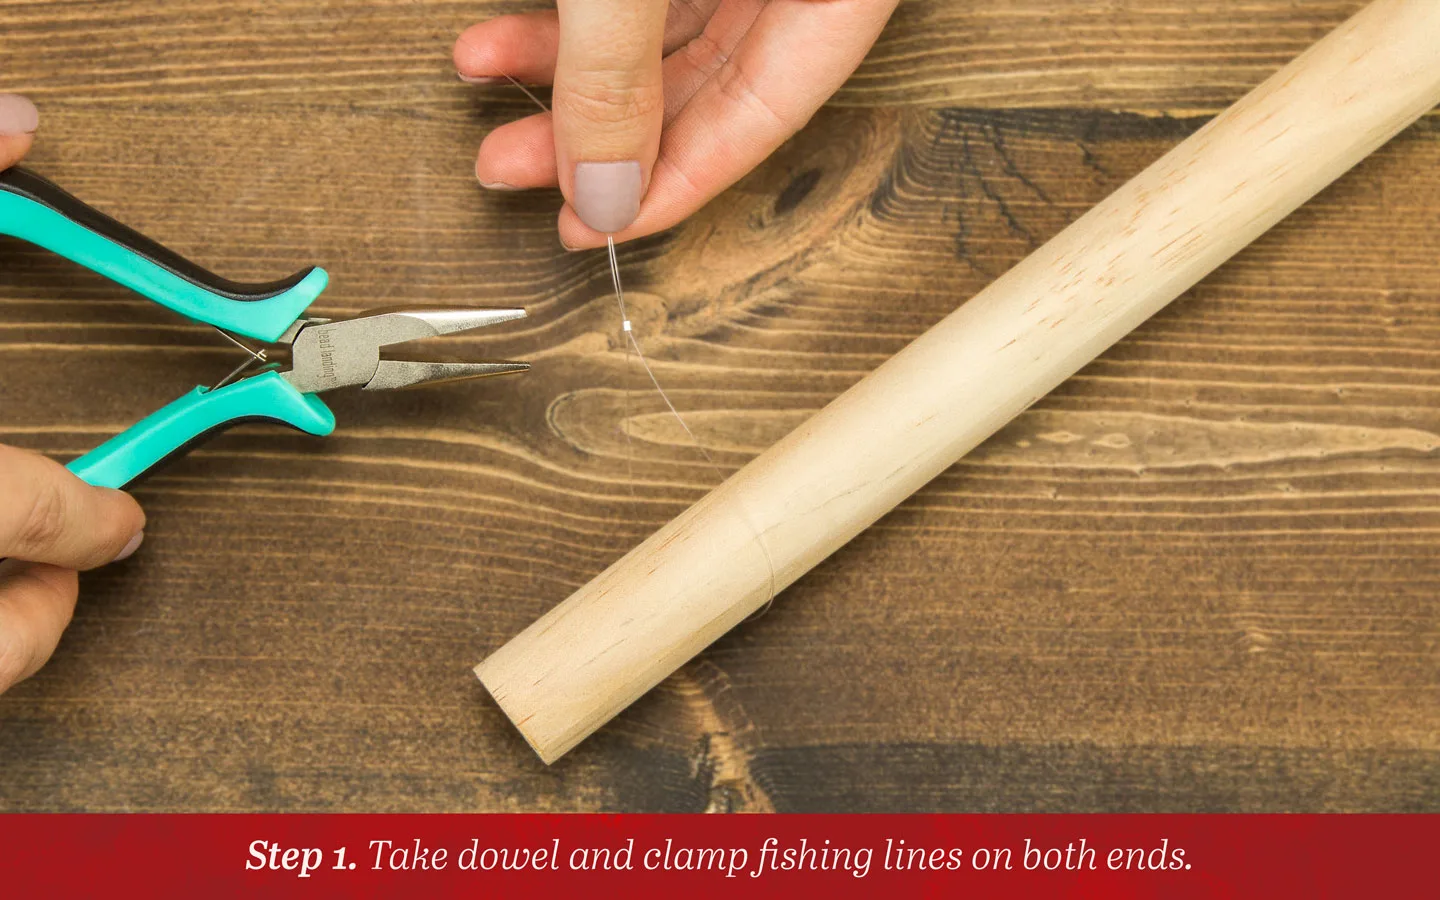 Step 1: Take dowel and clamp fishing lines on both ends.